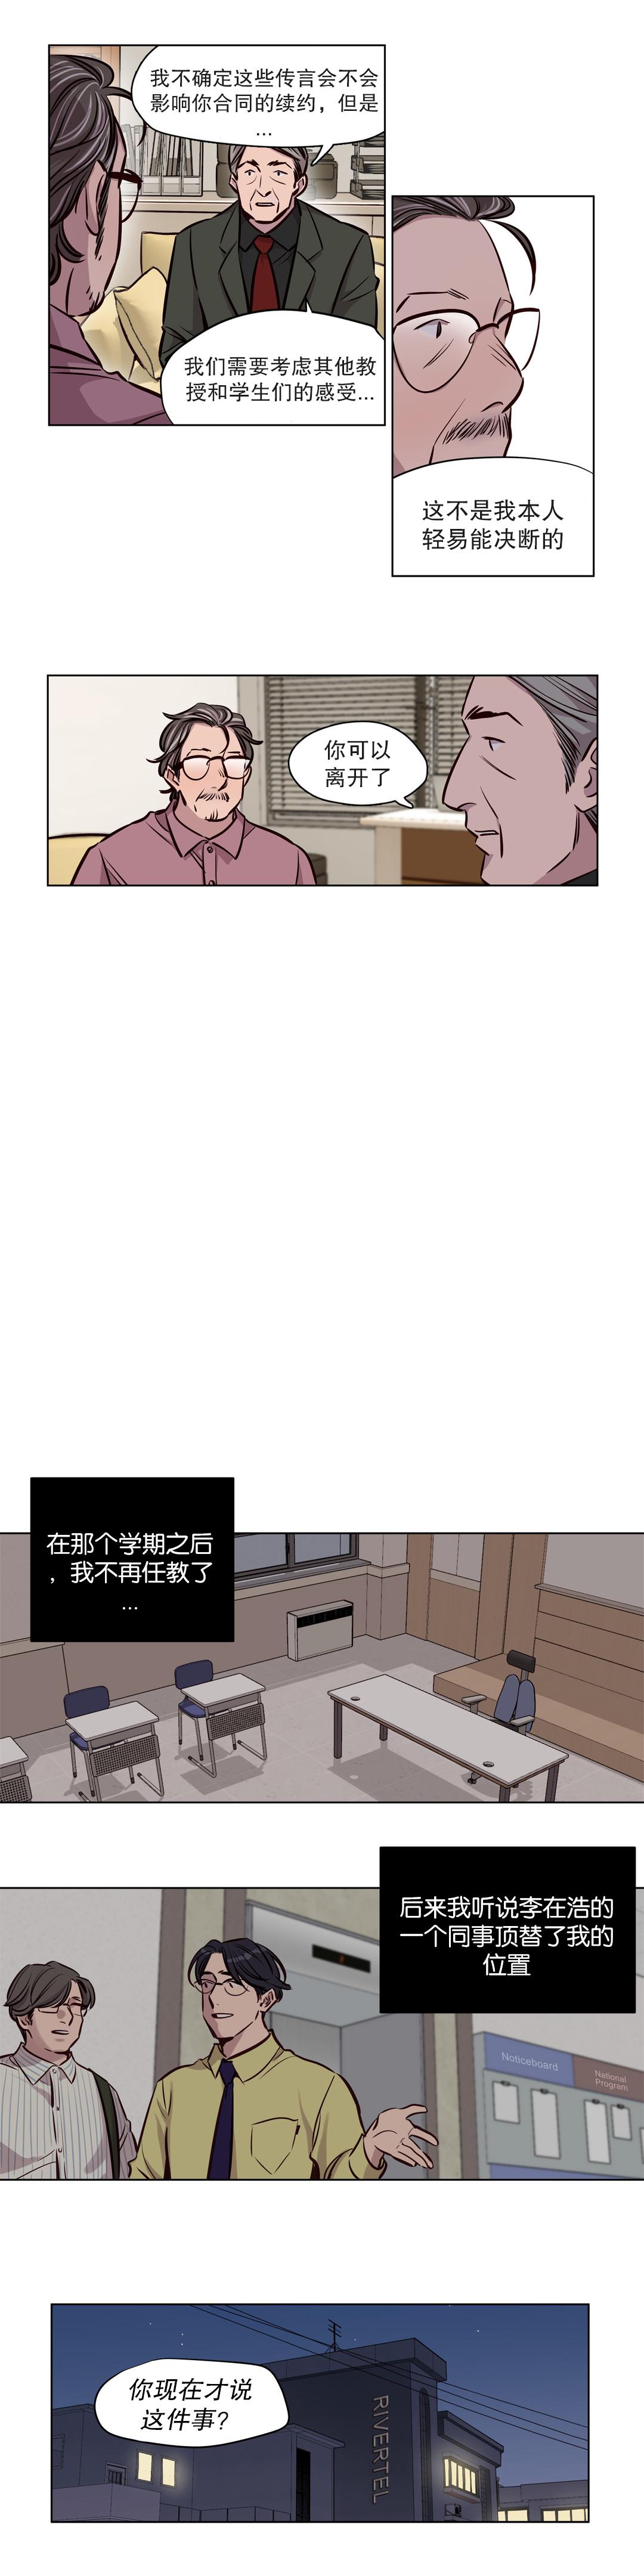 Stripper [Ramjak] 赎罪营(Atonement Camp) Ch.50-52 (Chinese) Hunks - Page 5